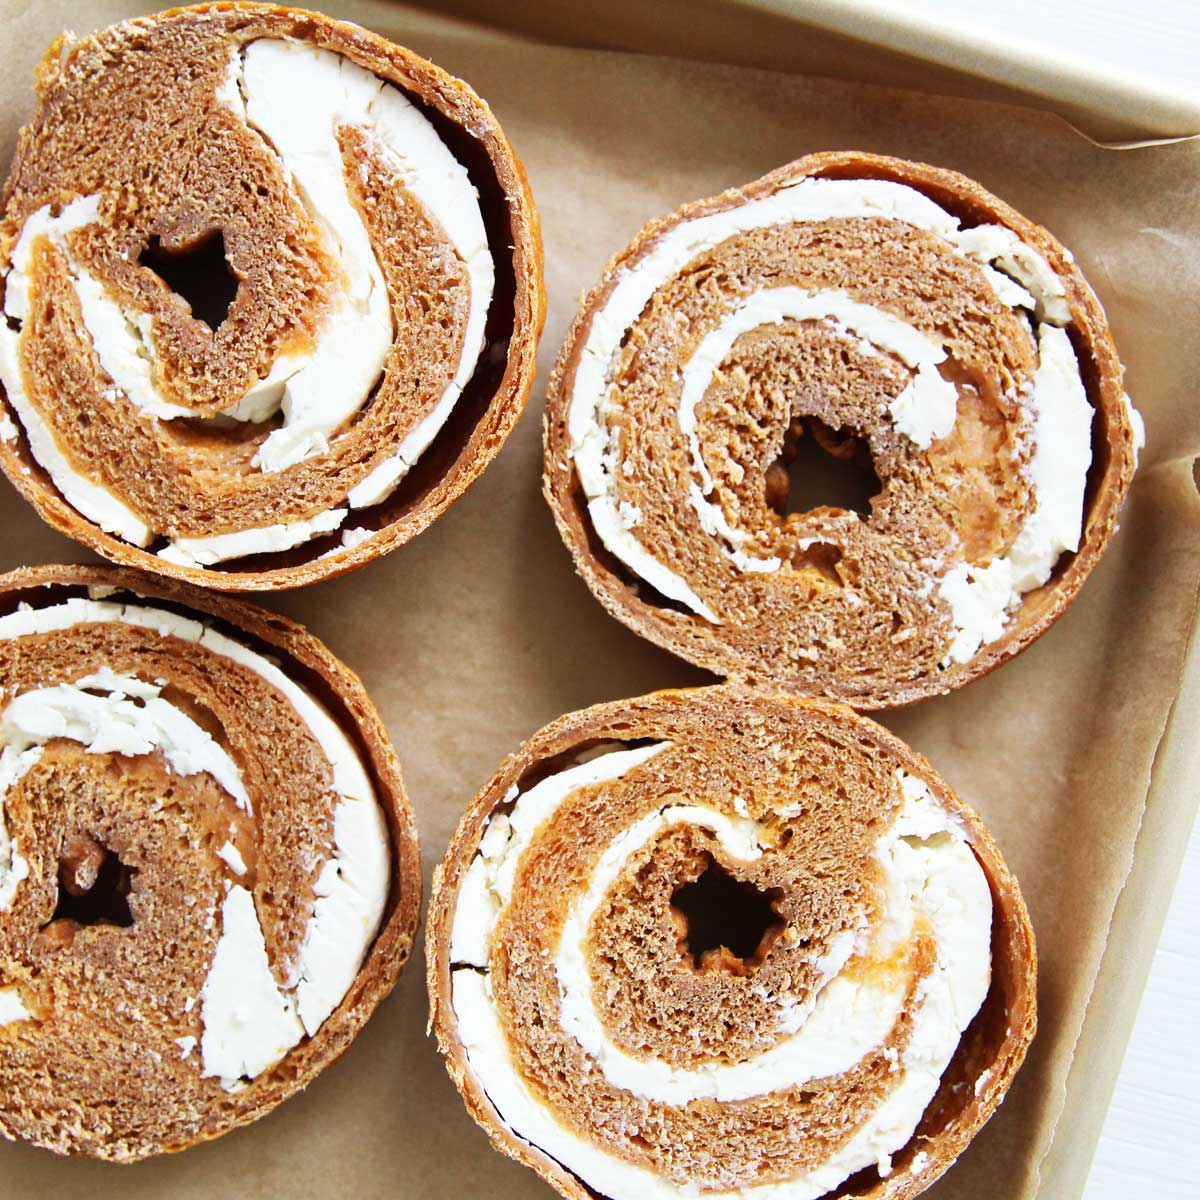 Healthy Pumpkin Bagels Stuffed with Cream Cheese (with Step-by-Step Photos) - Nutella Stuffed Banana